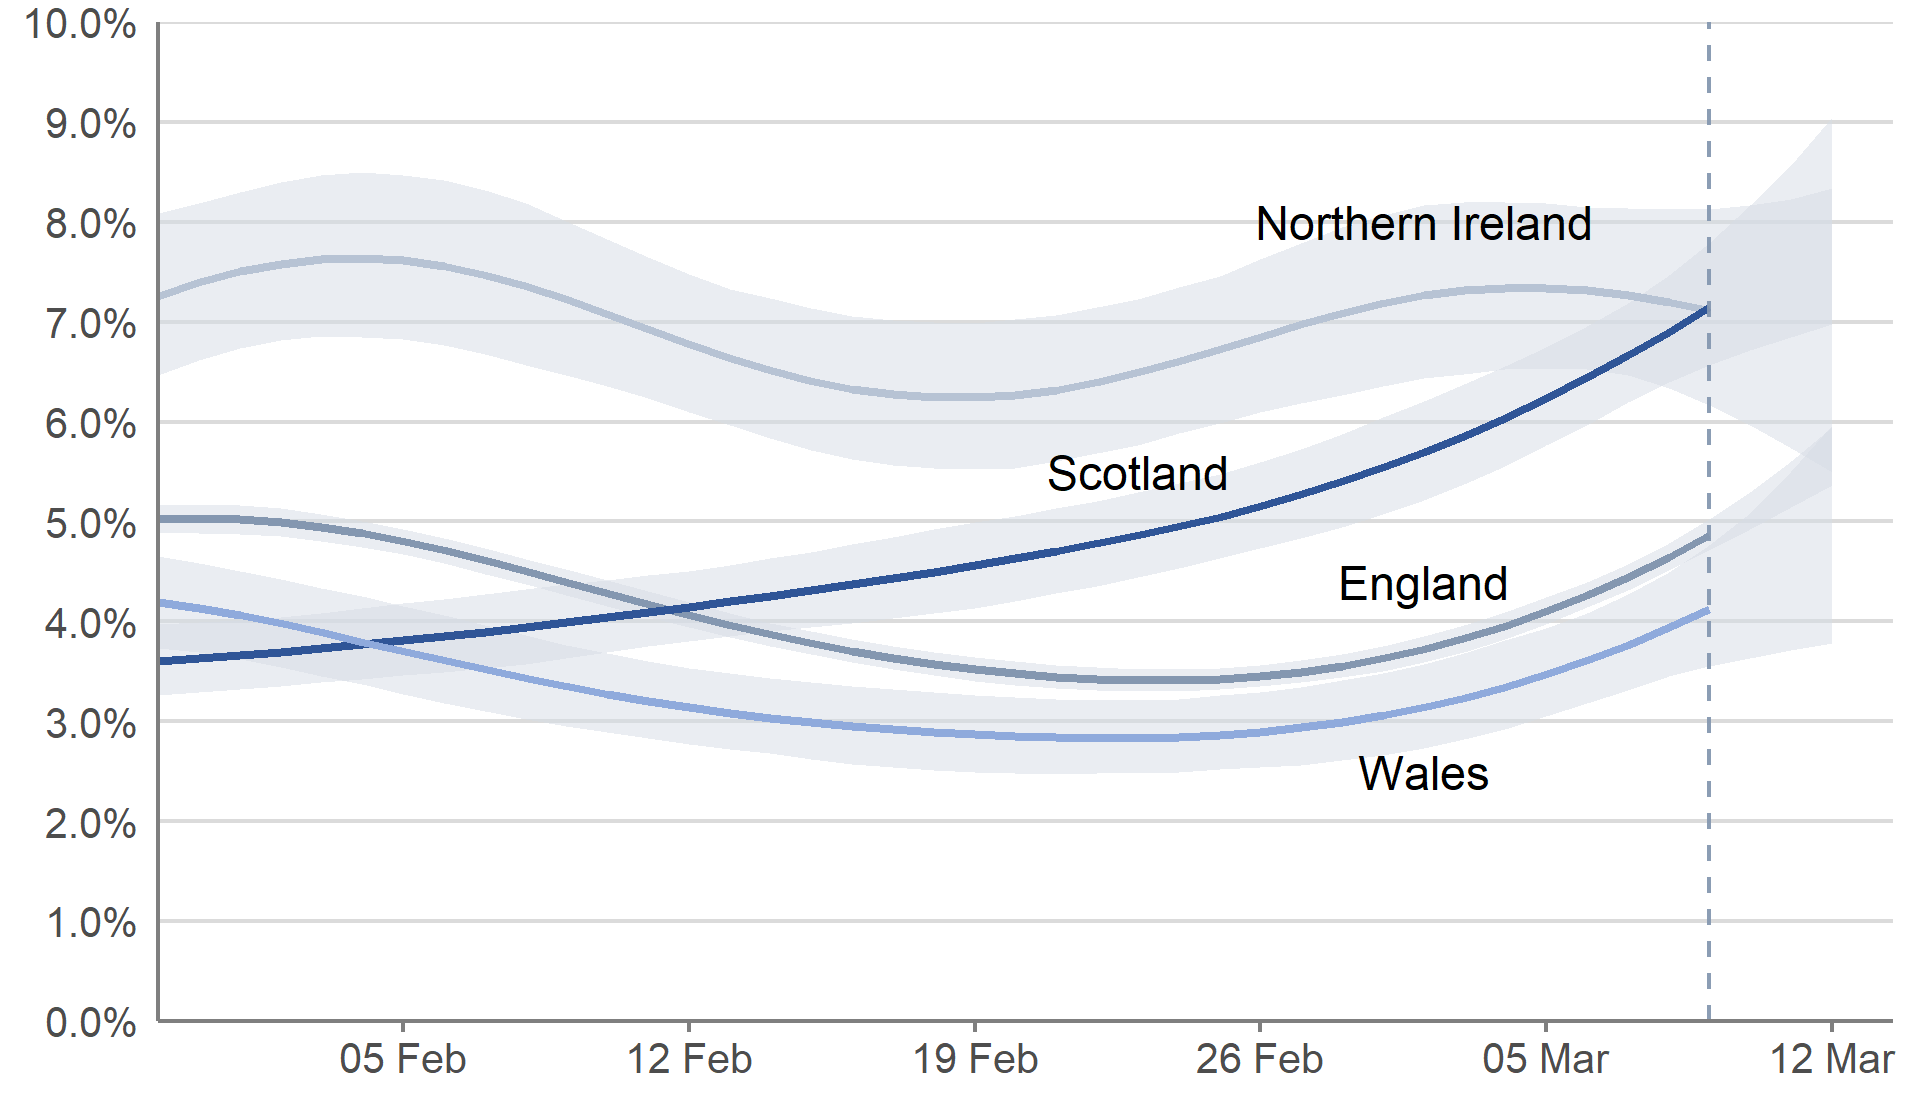 In England, Wales and Scotland, the estimated percentage of people testing positive continued to increase in the week to 12 March 2022. In Northern Ireland, the estimated percentage of people testing positive increased in the most recent two weeks, however the trend was uncertain in the most recent week.